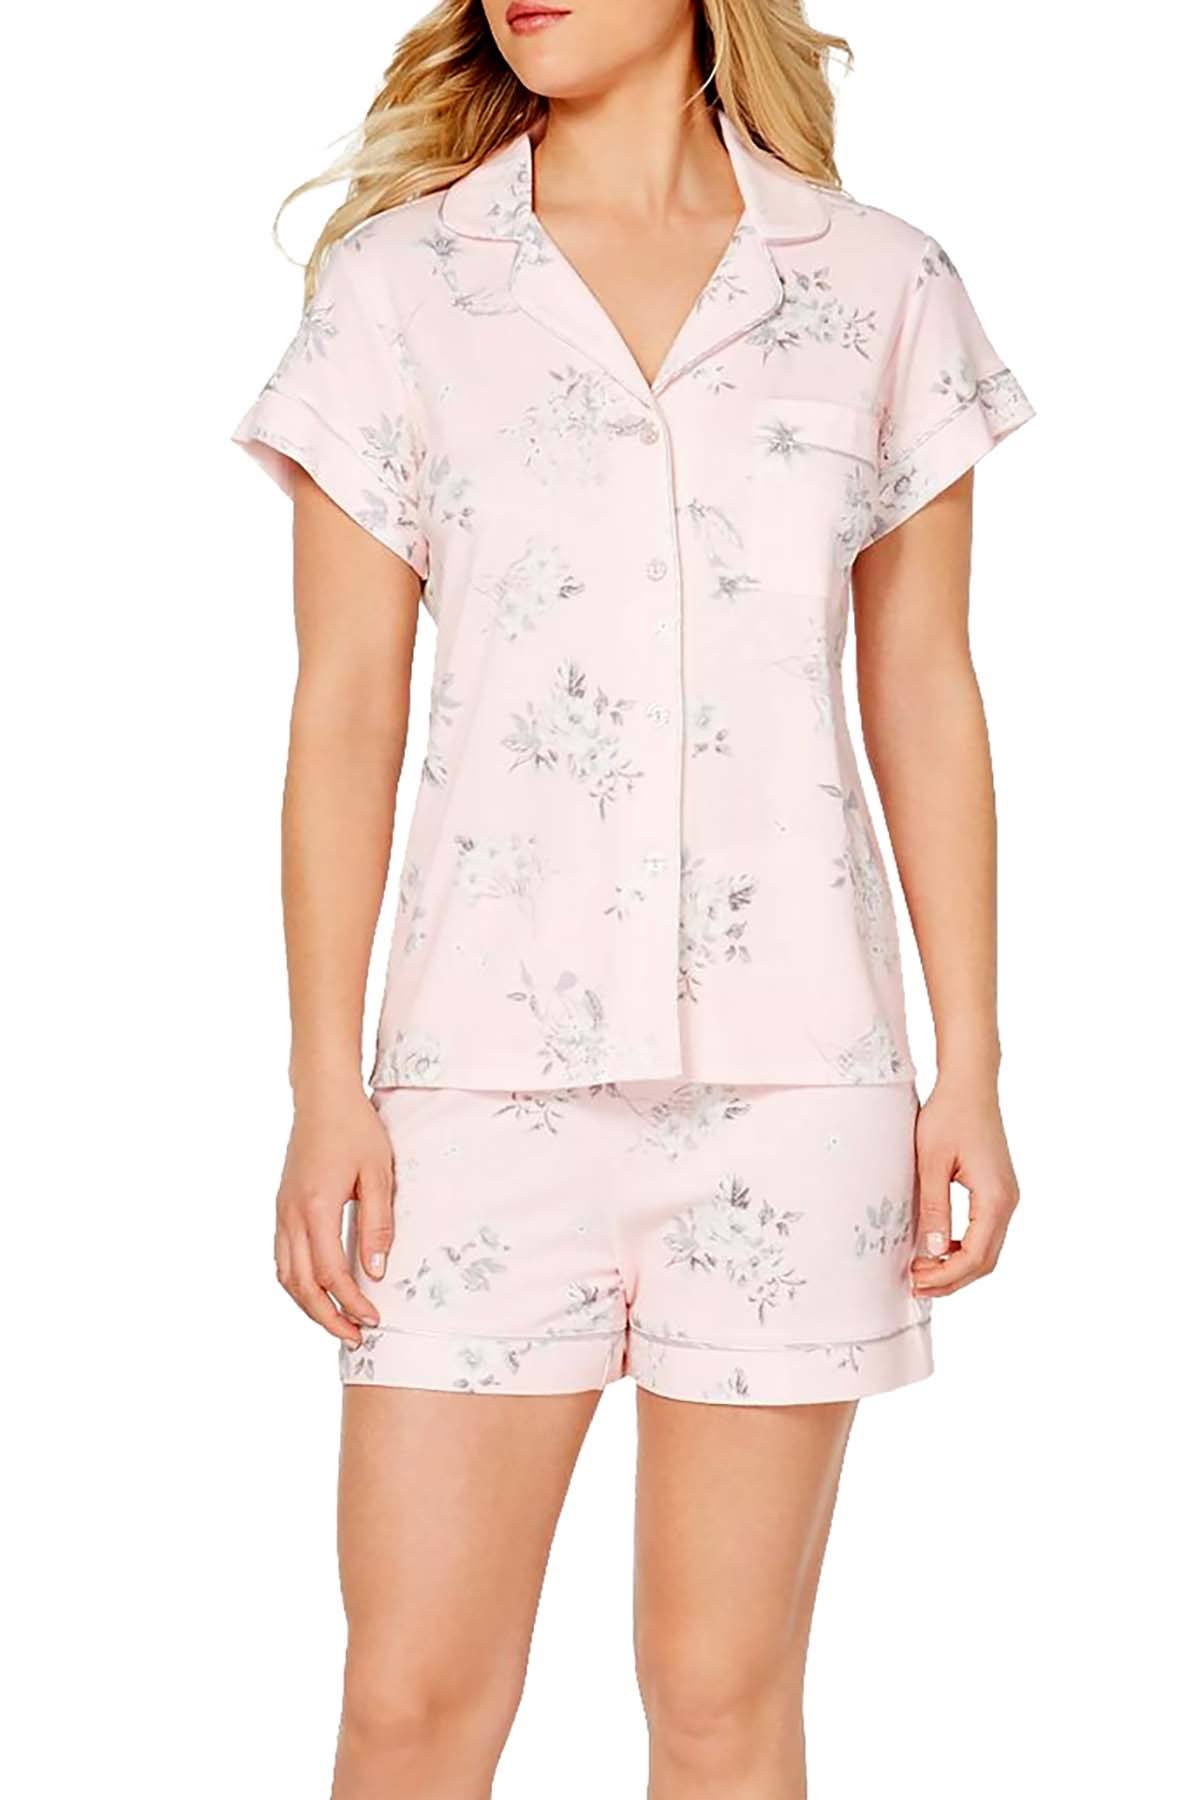 Miss Elaine Printed Notch Collar Top And Short Pajama Set in Pink Floral